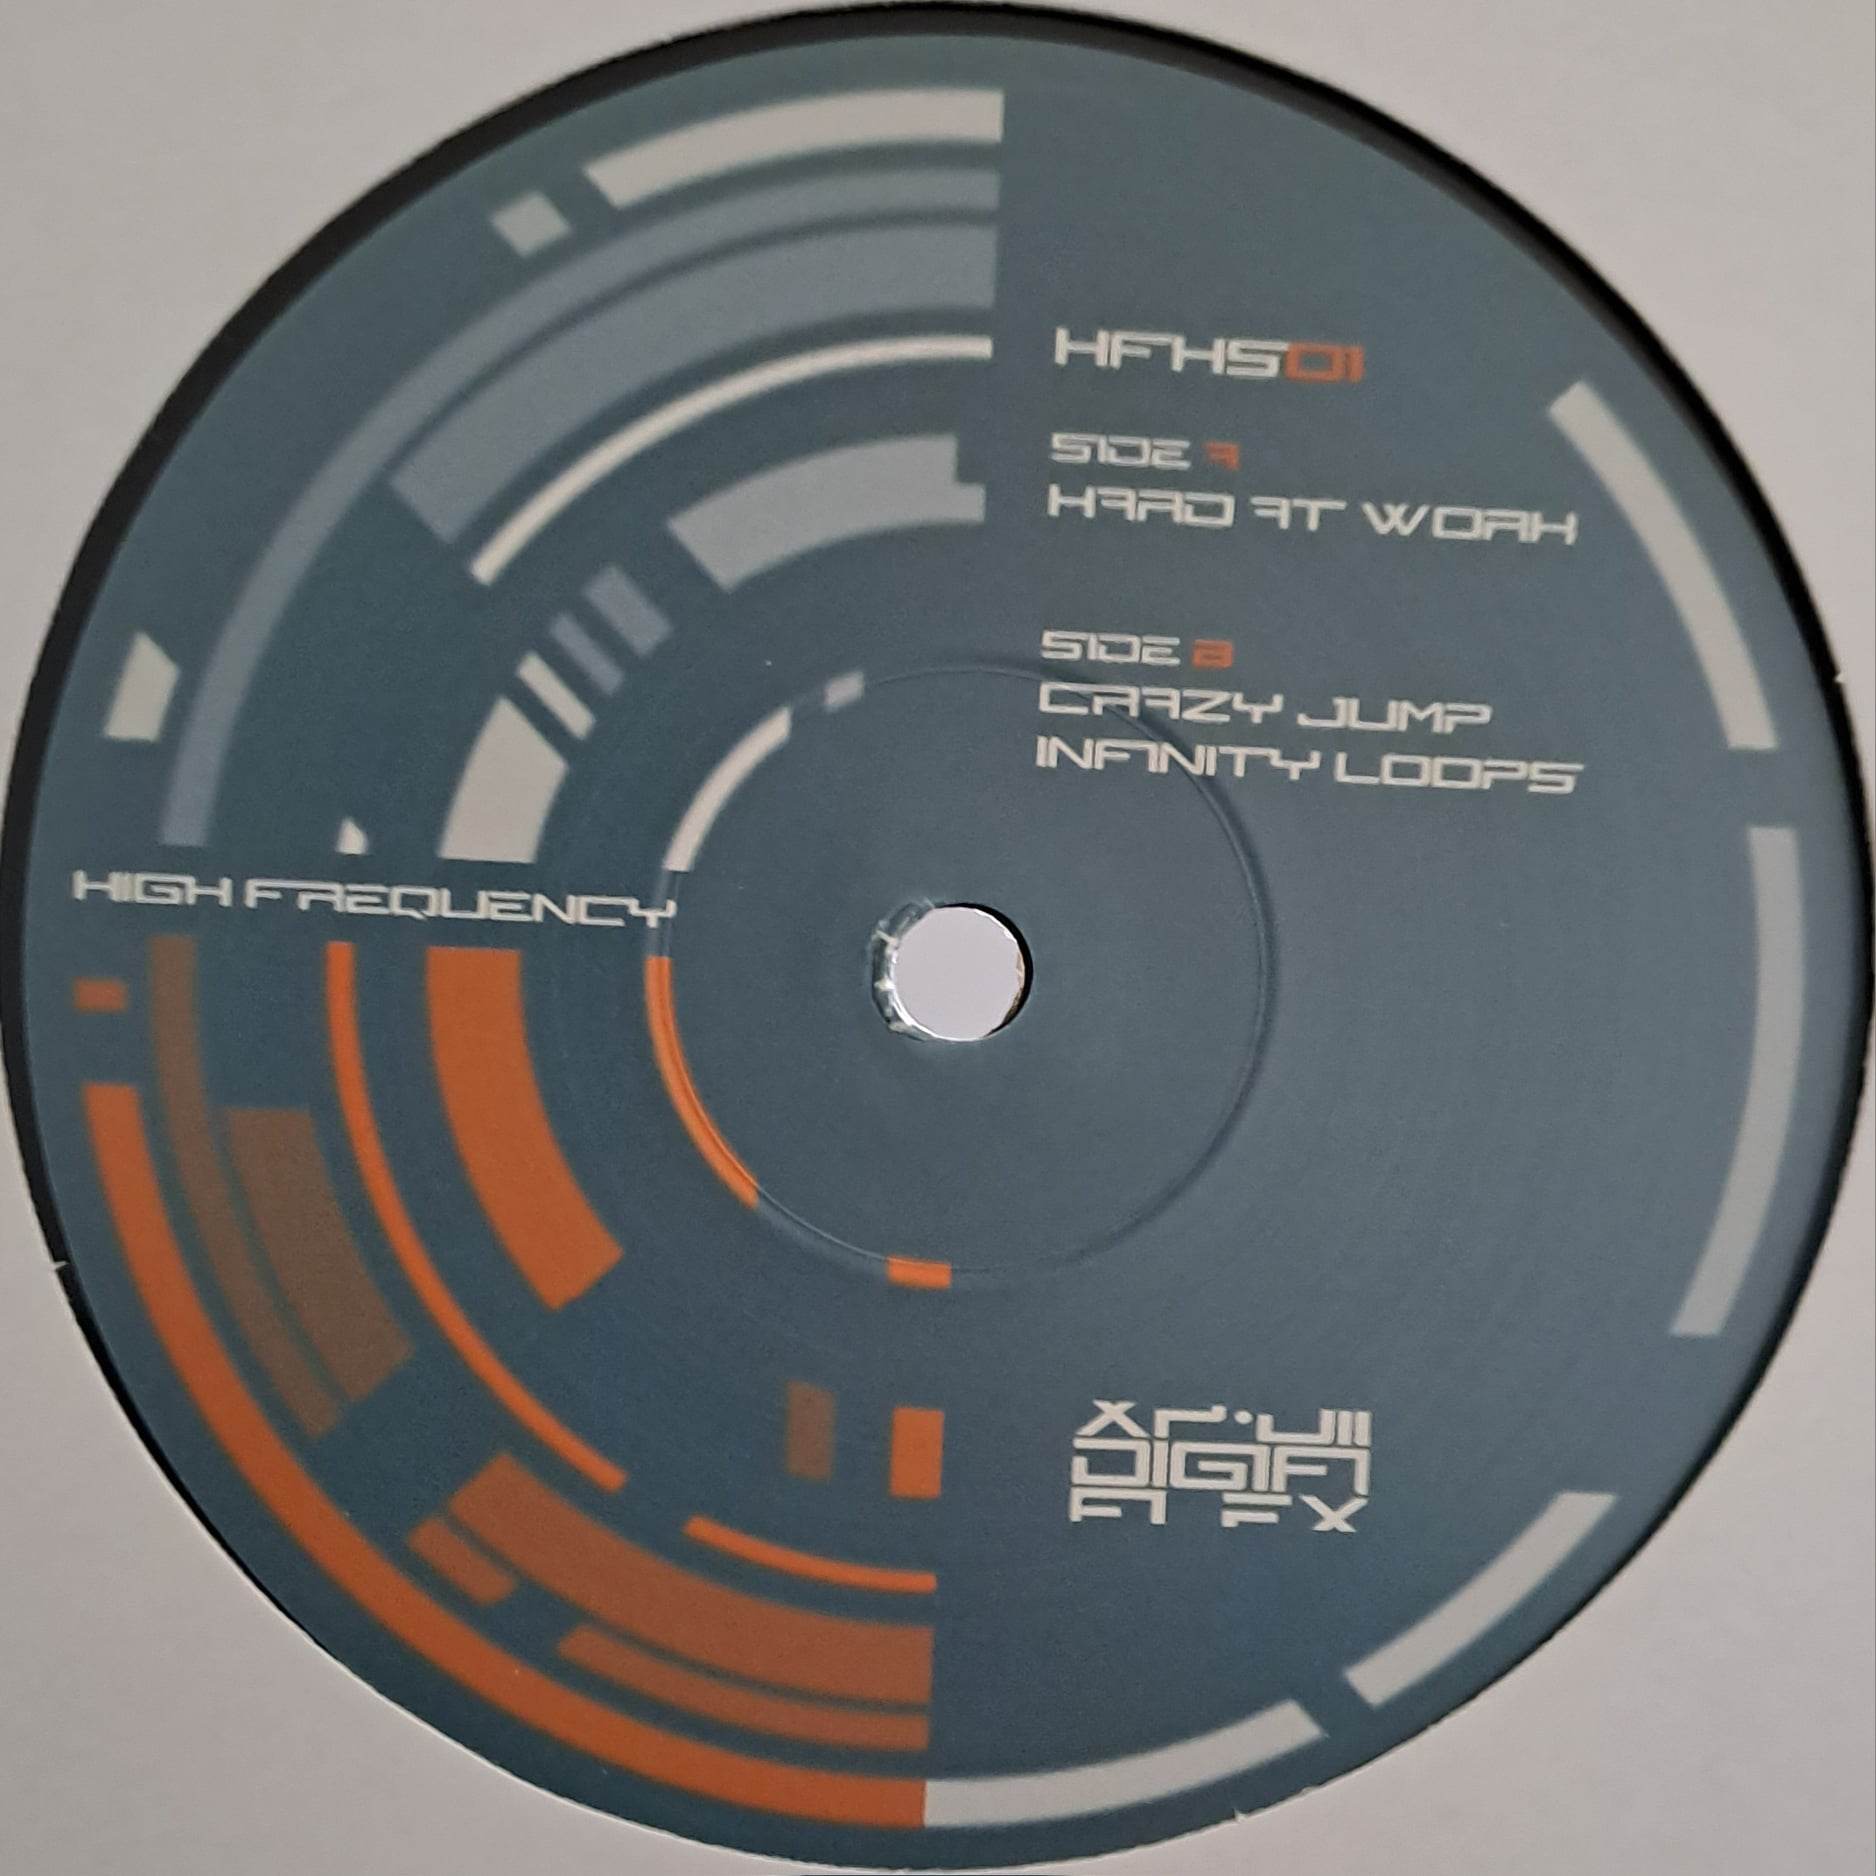 High Frequency 01 RP - vinyle hard techno